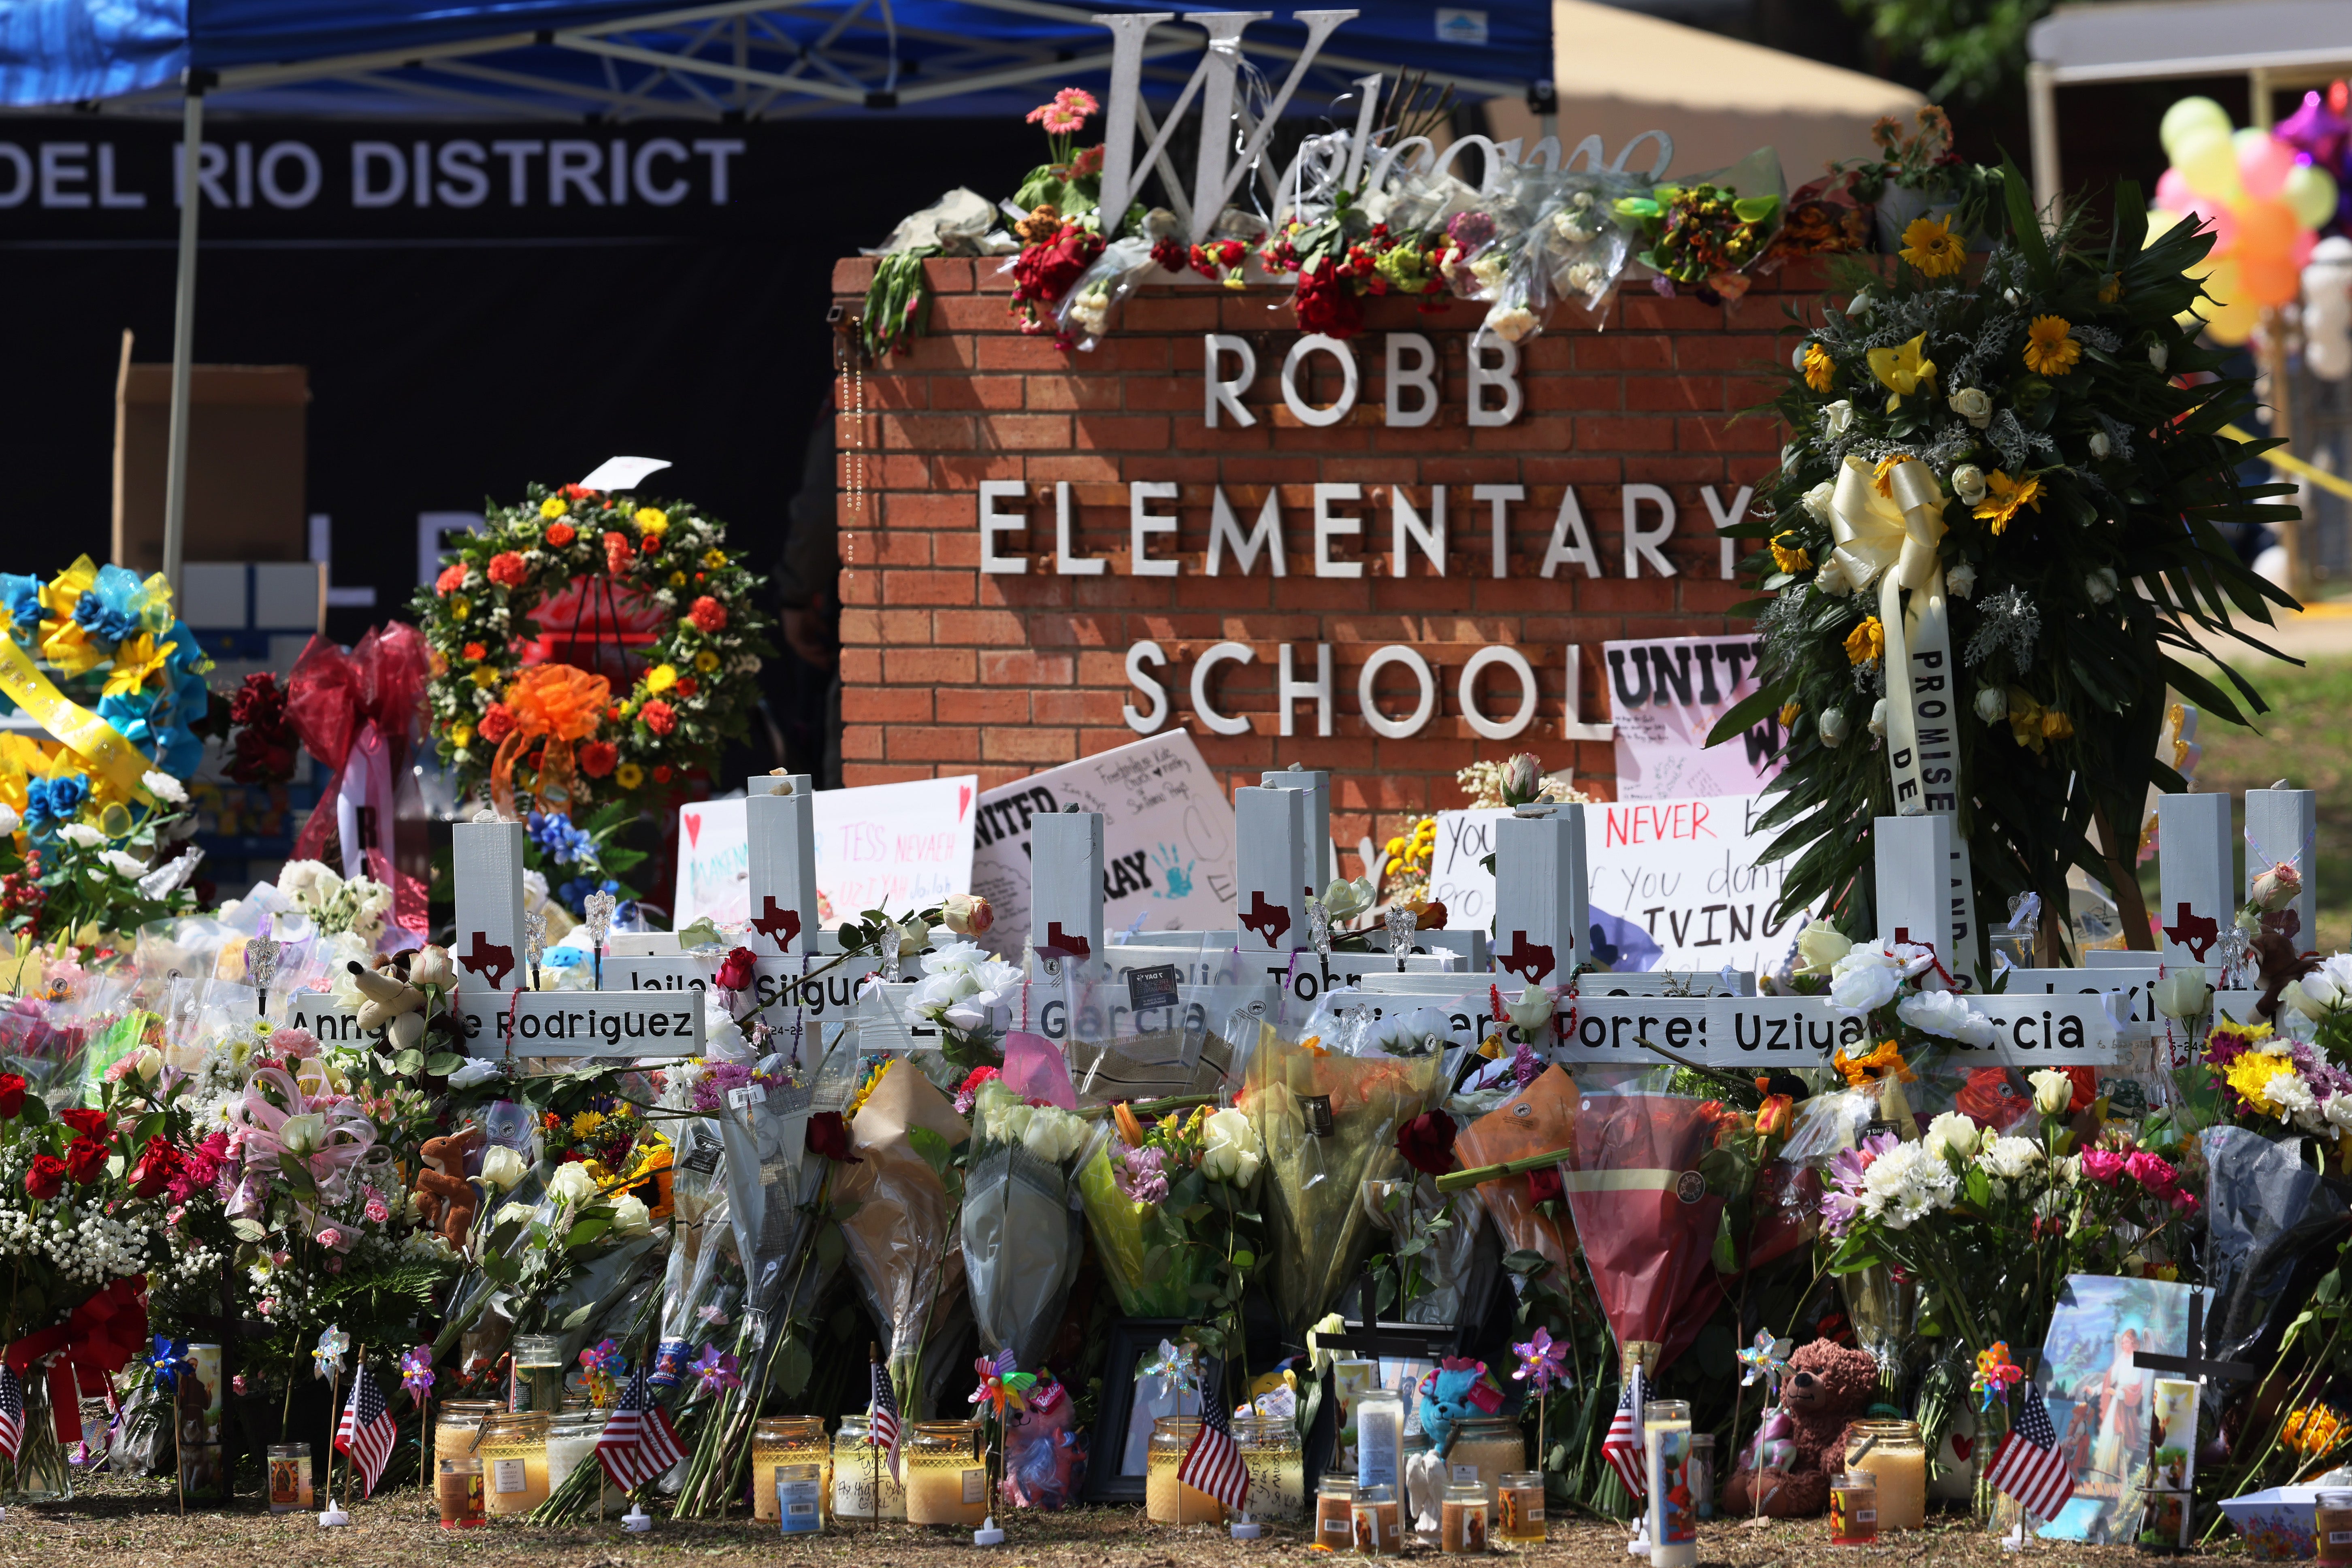 Two teachers and 19 students were killed by the gunman